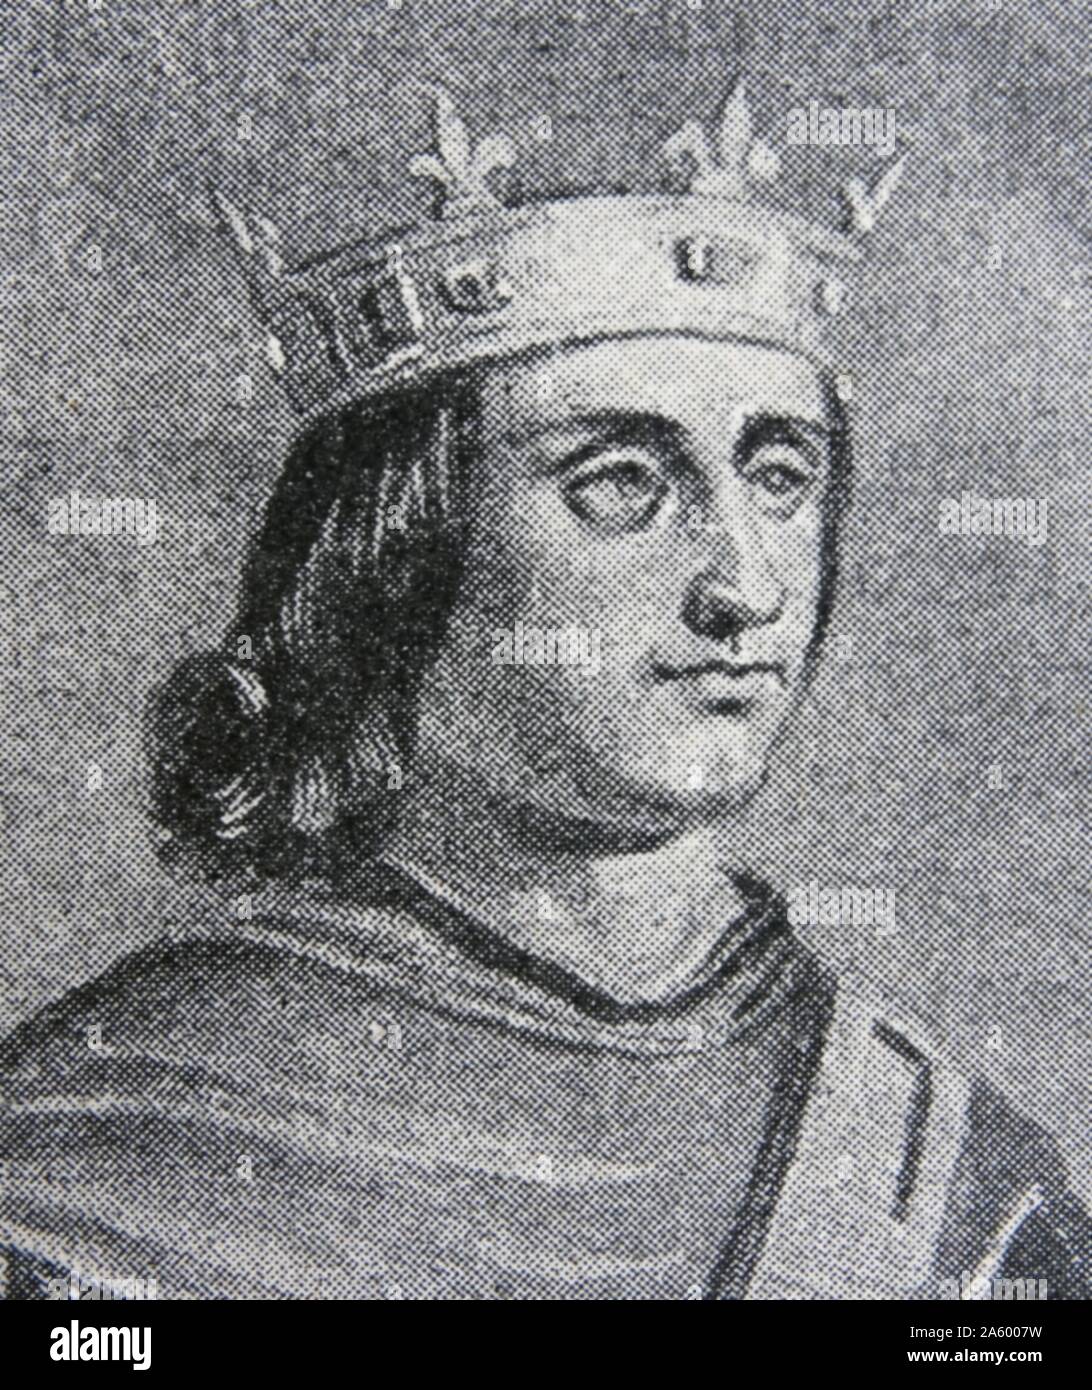 Portrait of King Philip VI of France (1293-1350) was the first King of France from the House of Valois. Dated 14th Century Stock Photo